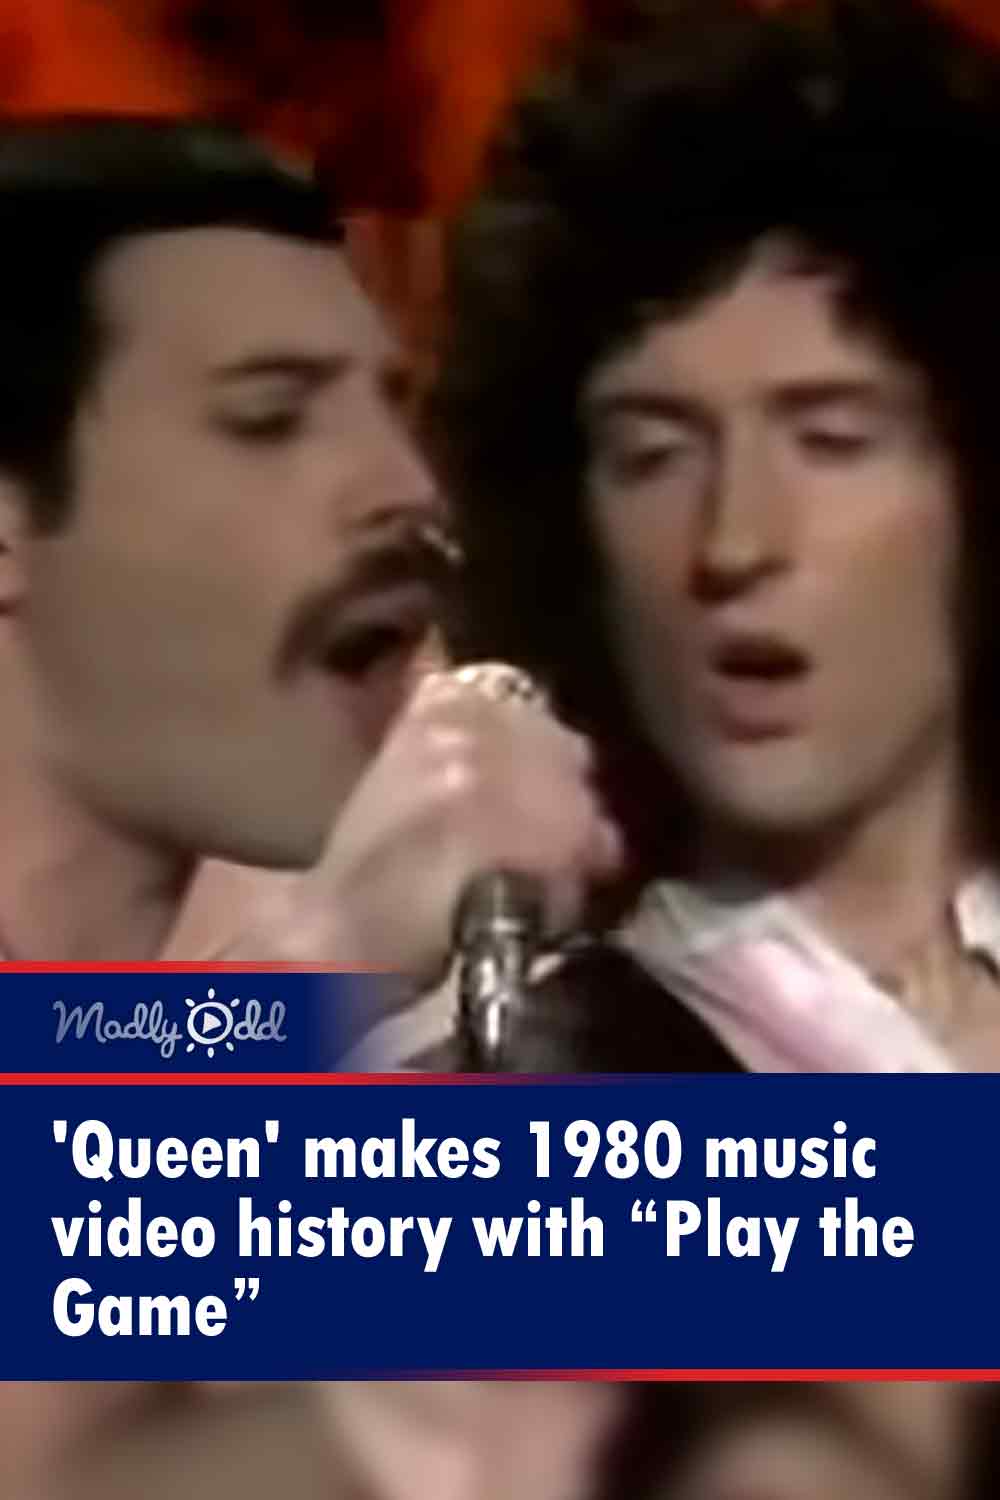 \'Queen\' makes 1980 music video history with “Play the Game”